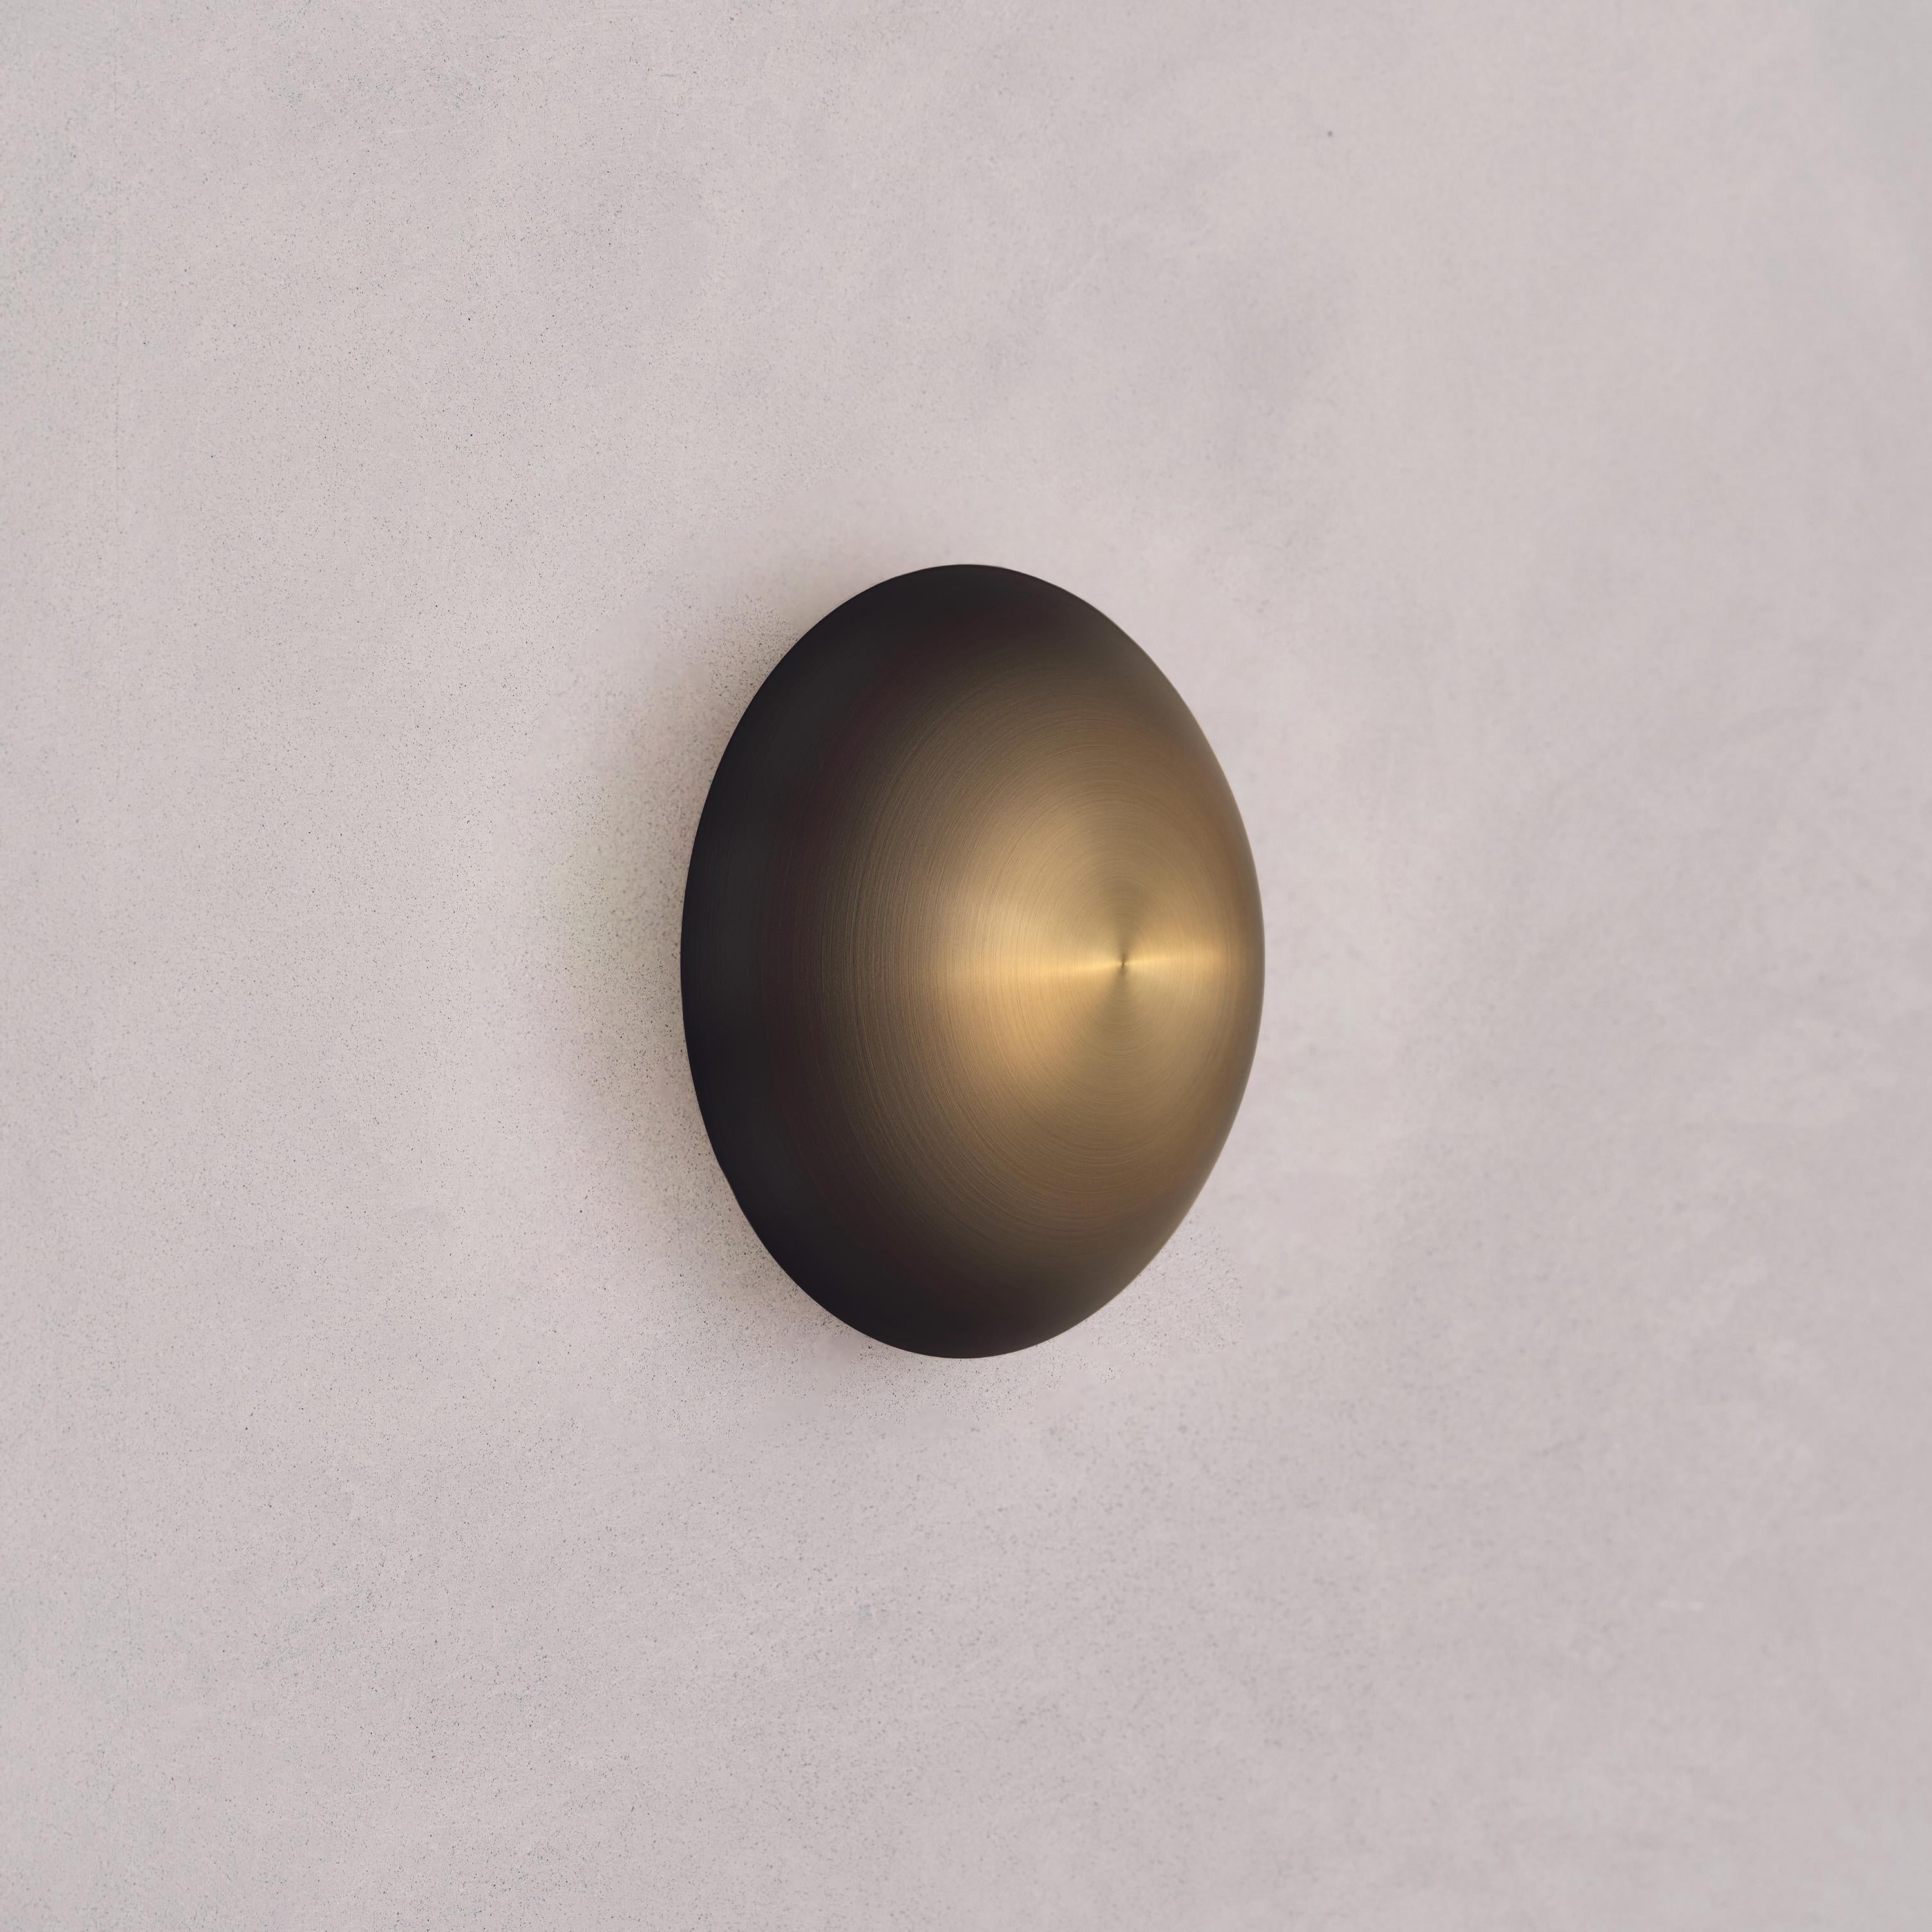 British Cosmic 'Comet Ore 26' Bronze Gradient Patinated Brass Wall Light, Sconce For Sale